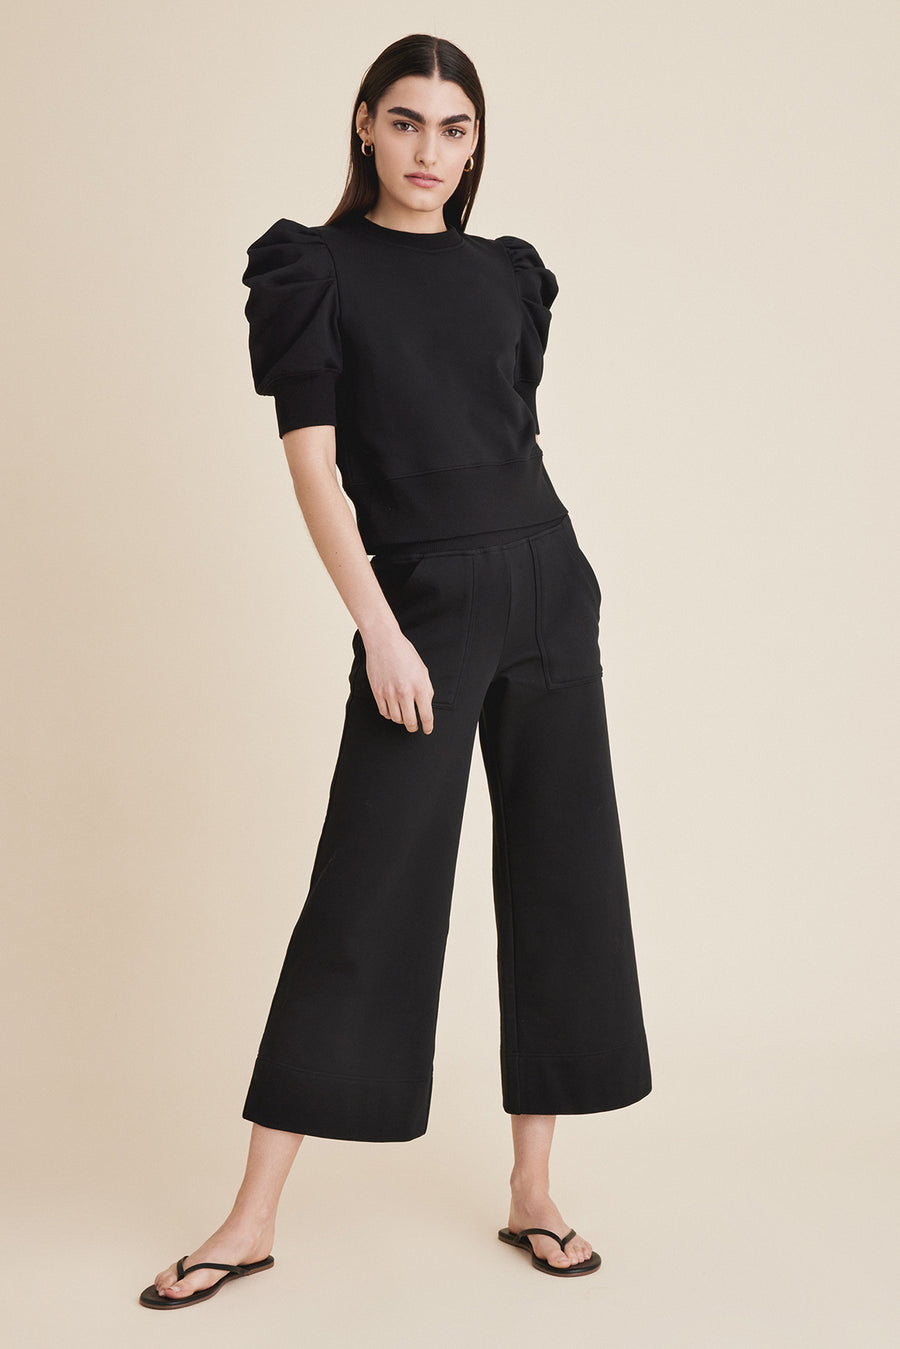 The Culotte Sweatpant in Black – Sold Out NYC